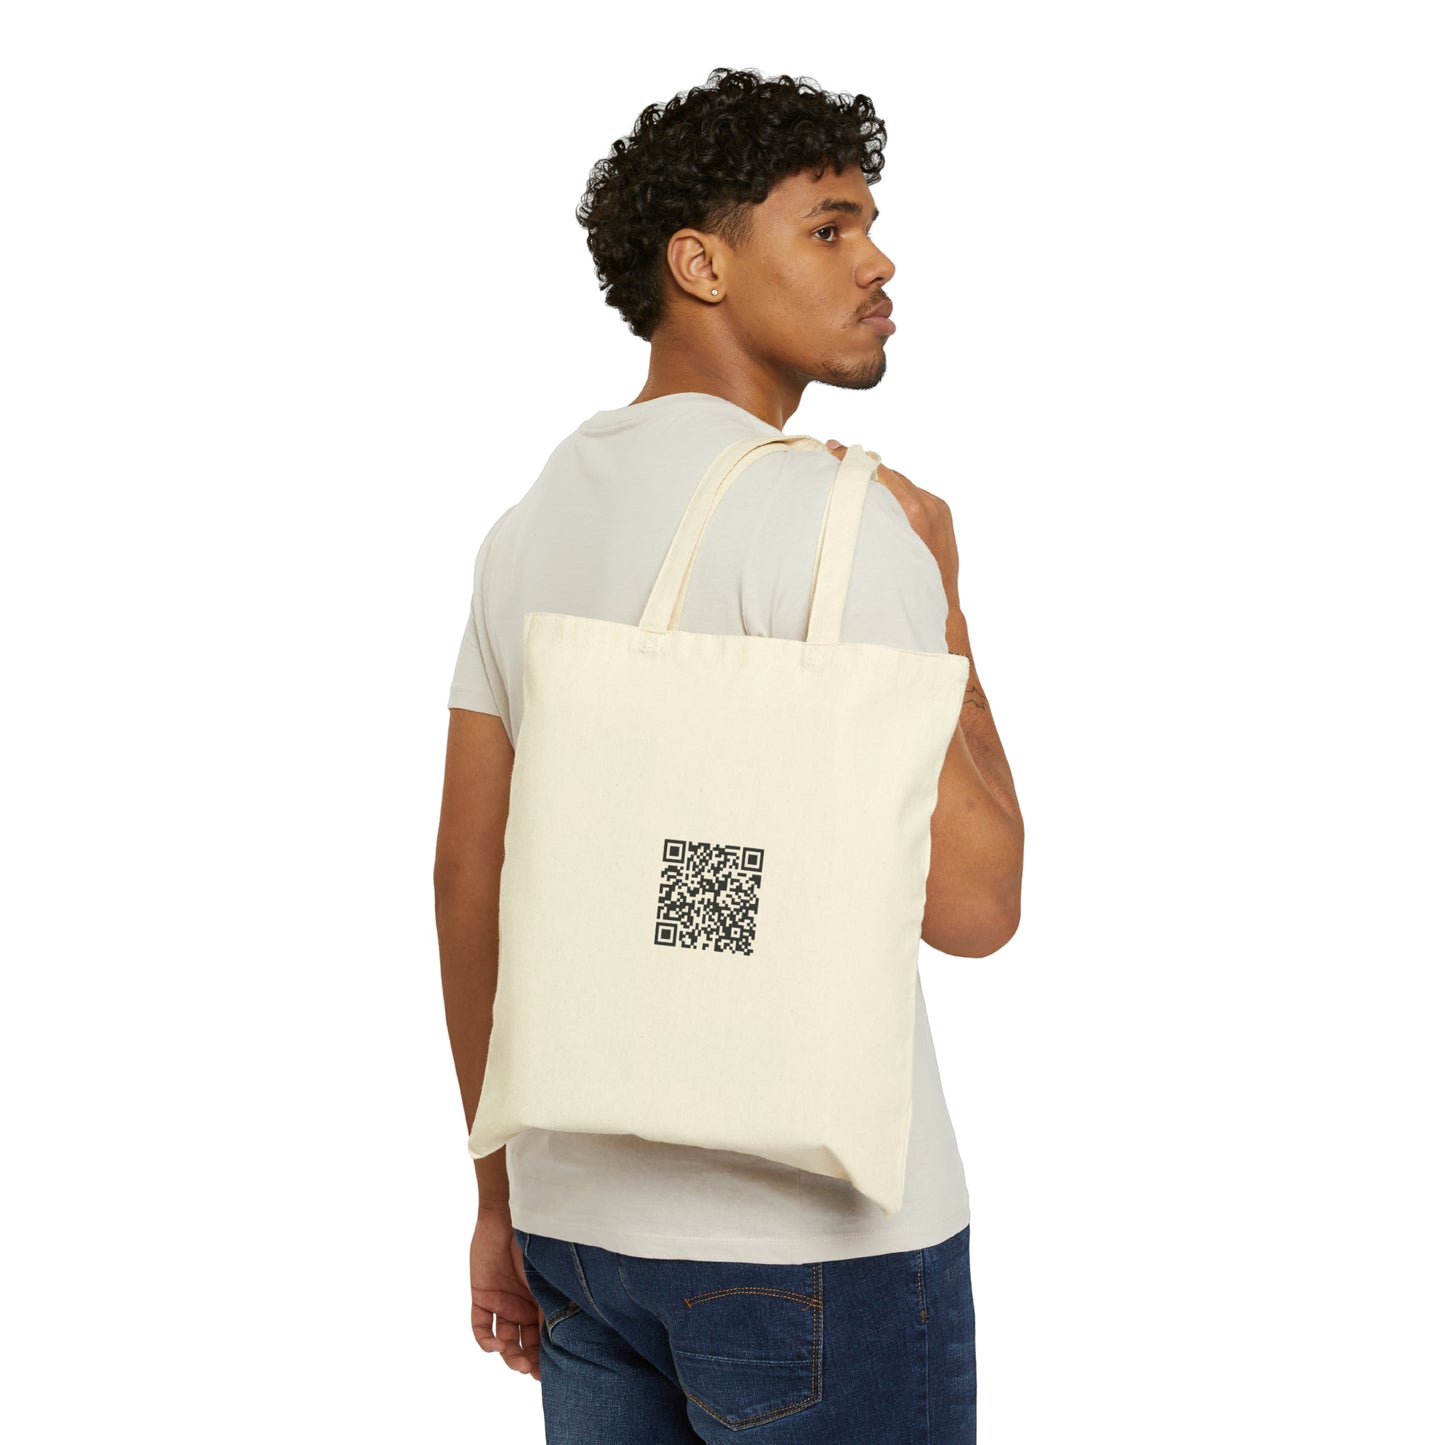 Night Games - Cotton Canvas Tote Bag